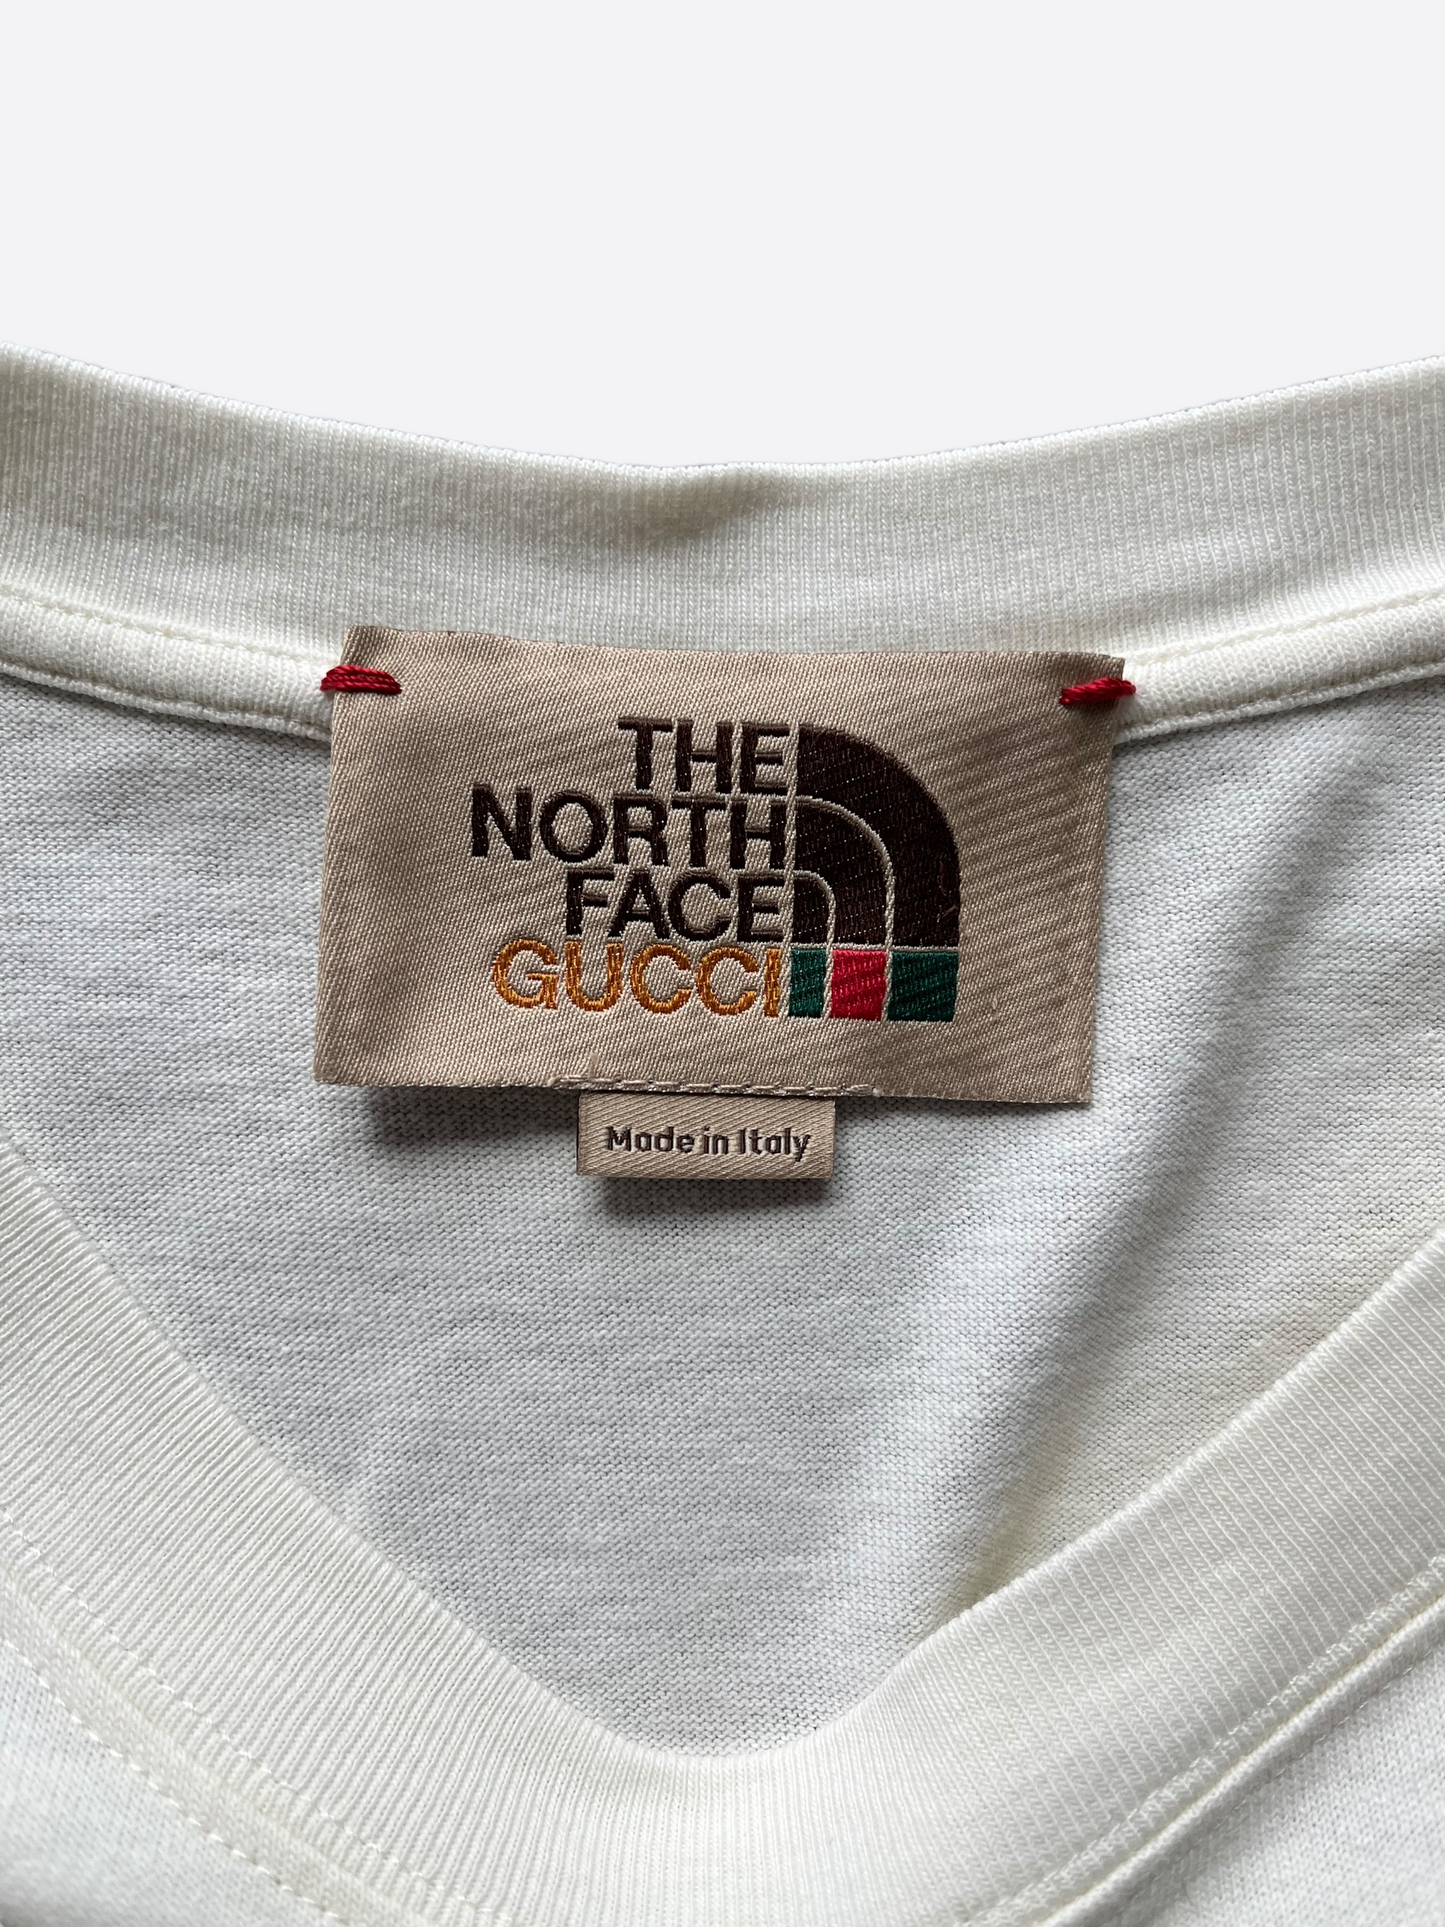 Gucci The North Face Gucci Black Graphic Print Hoodie – Savonches